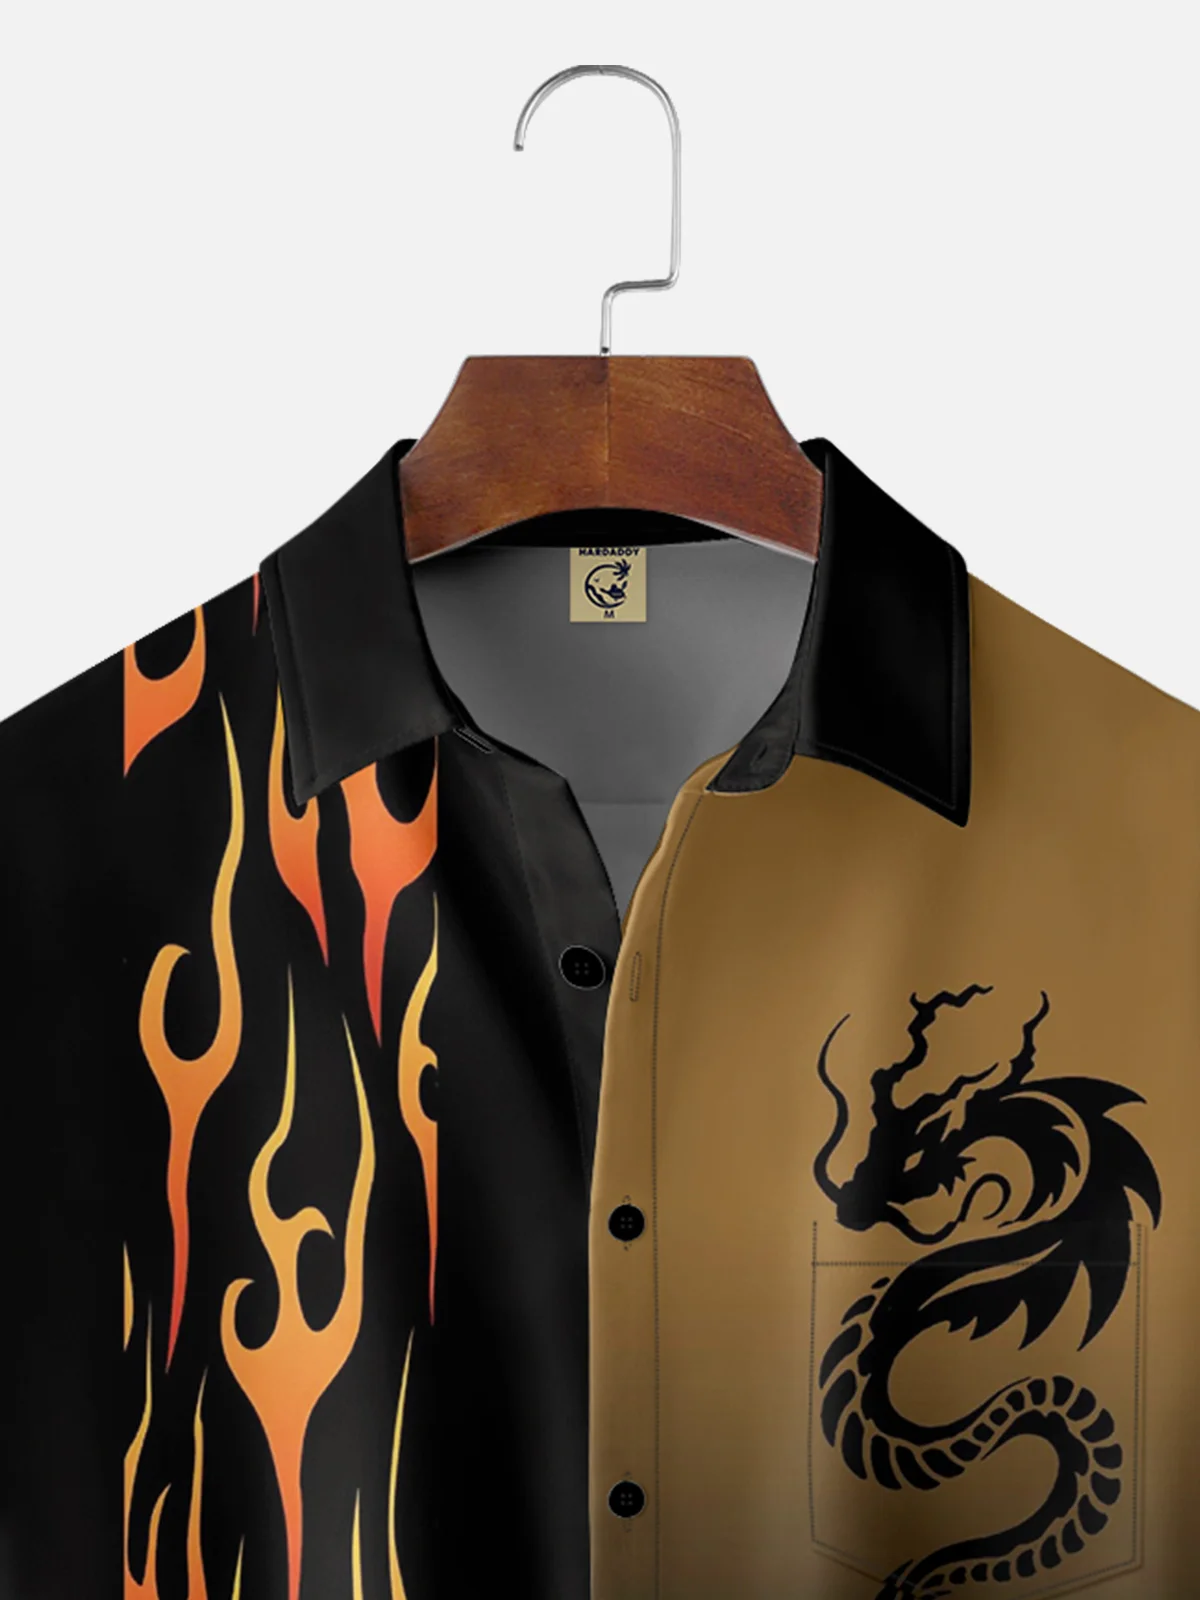 Hardaddy Breathable Wicking Flame Dragon Chest Pocket Bowling Shirt